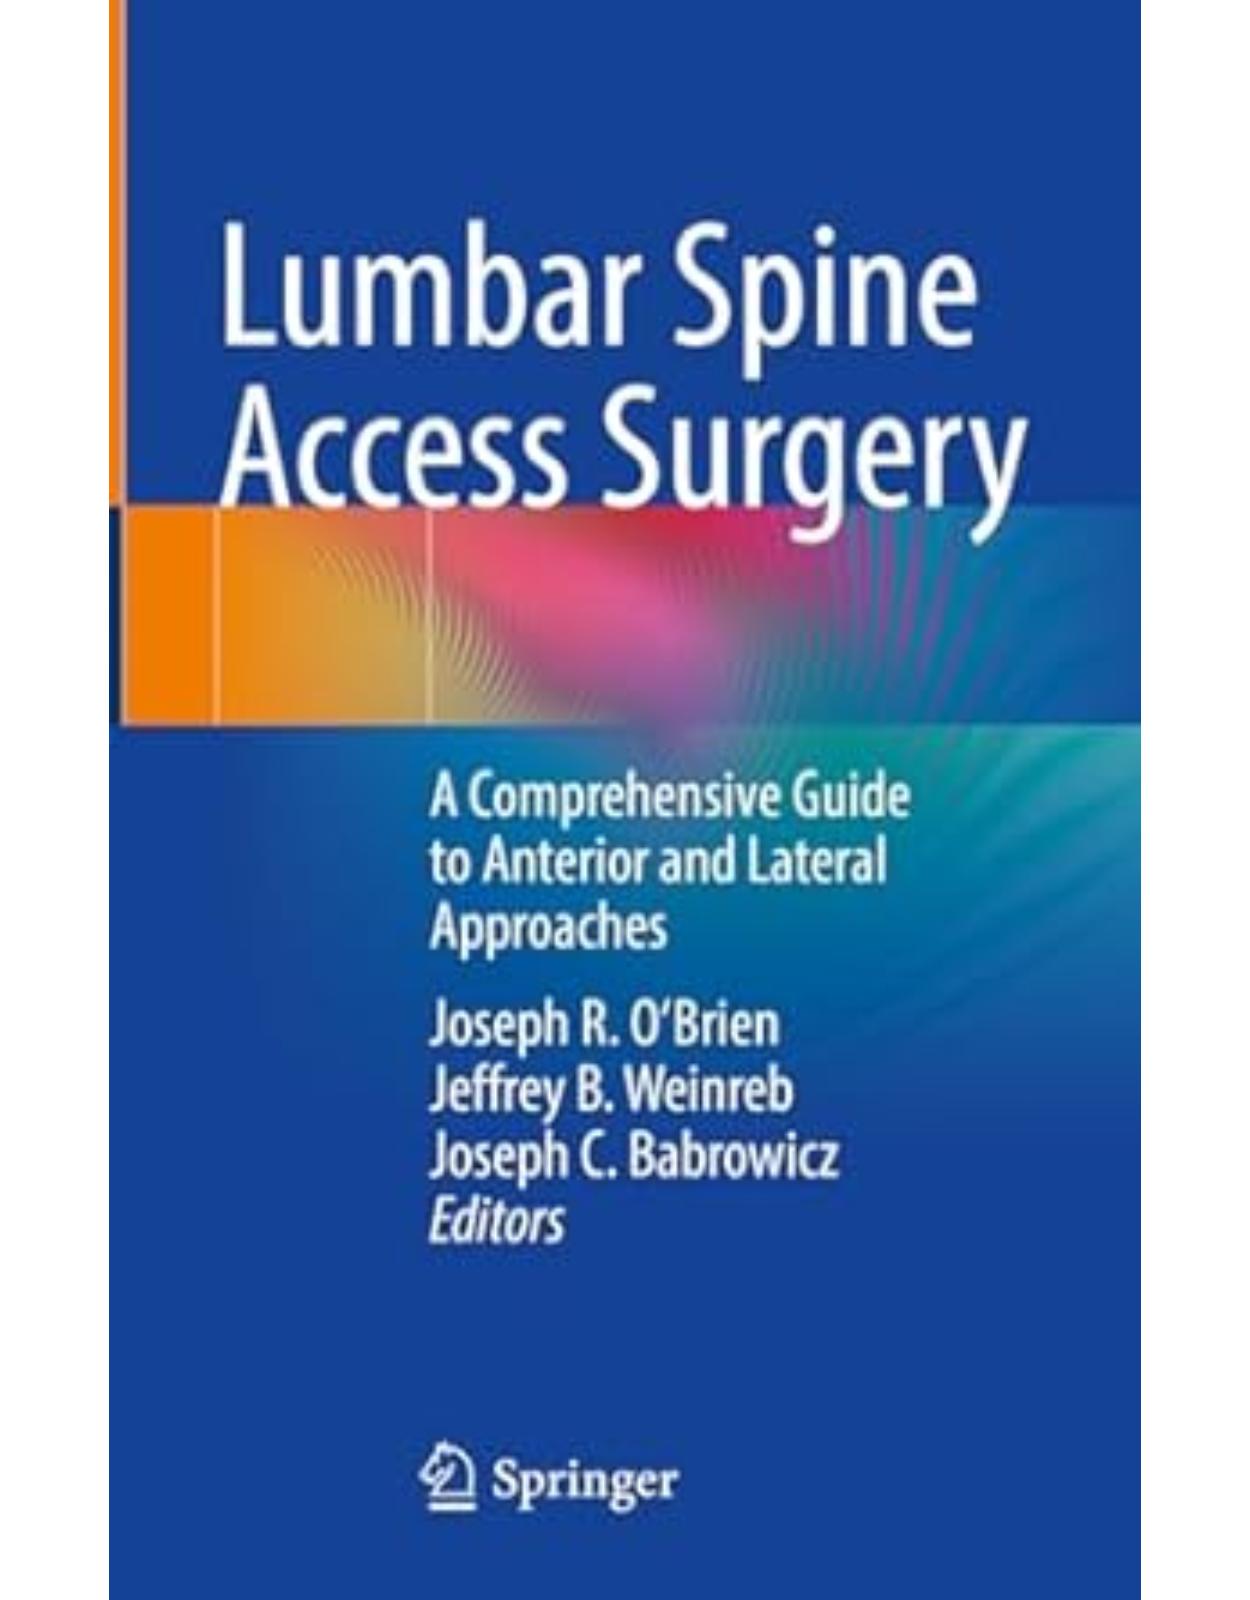 Lumbar Spine Access Surgery: A Comprehensive Guide to Anterior and Lateral Approaches